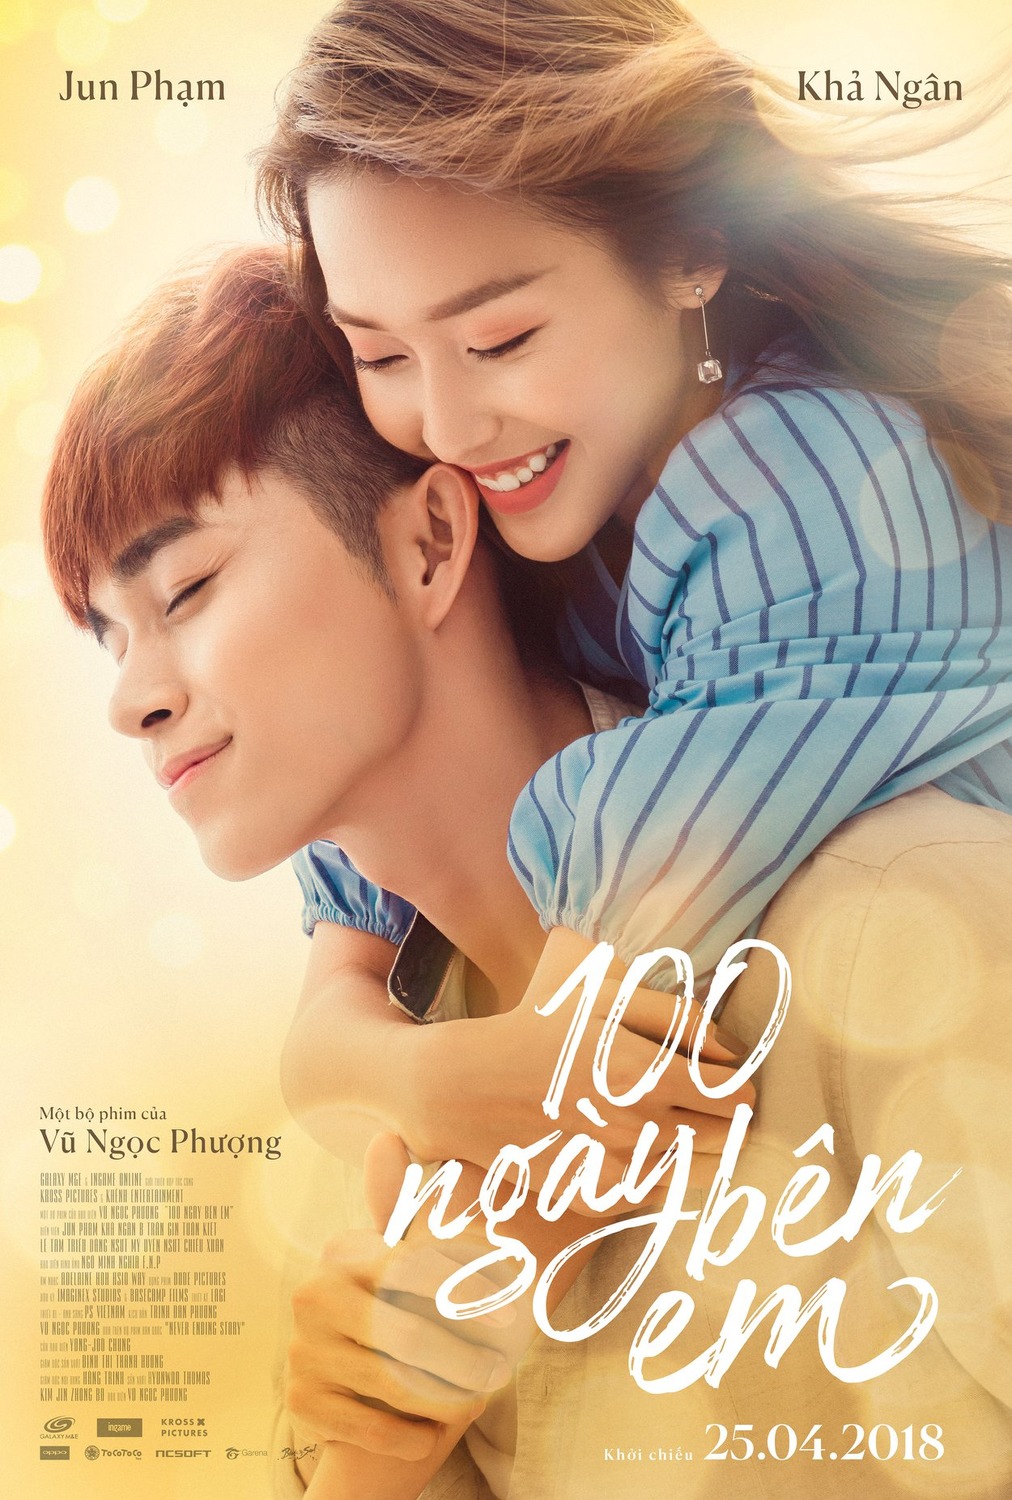 Extra Large Movie Poster Image for 100 Ngày Bên Em (#9 of 9)